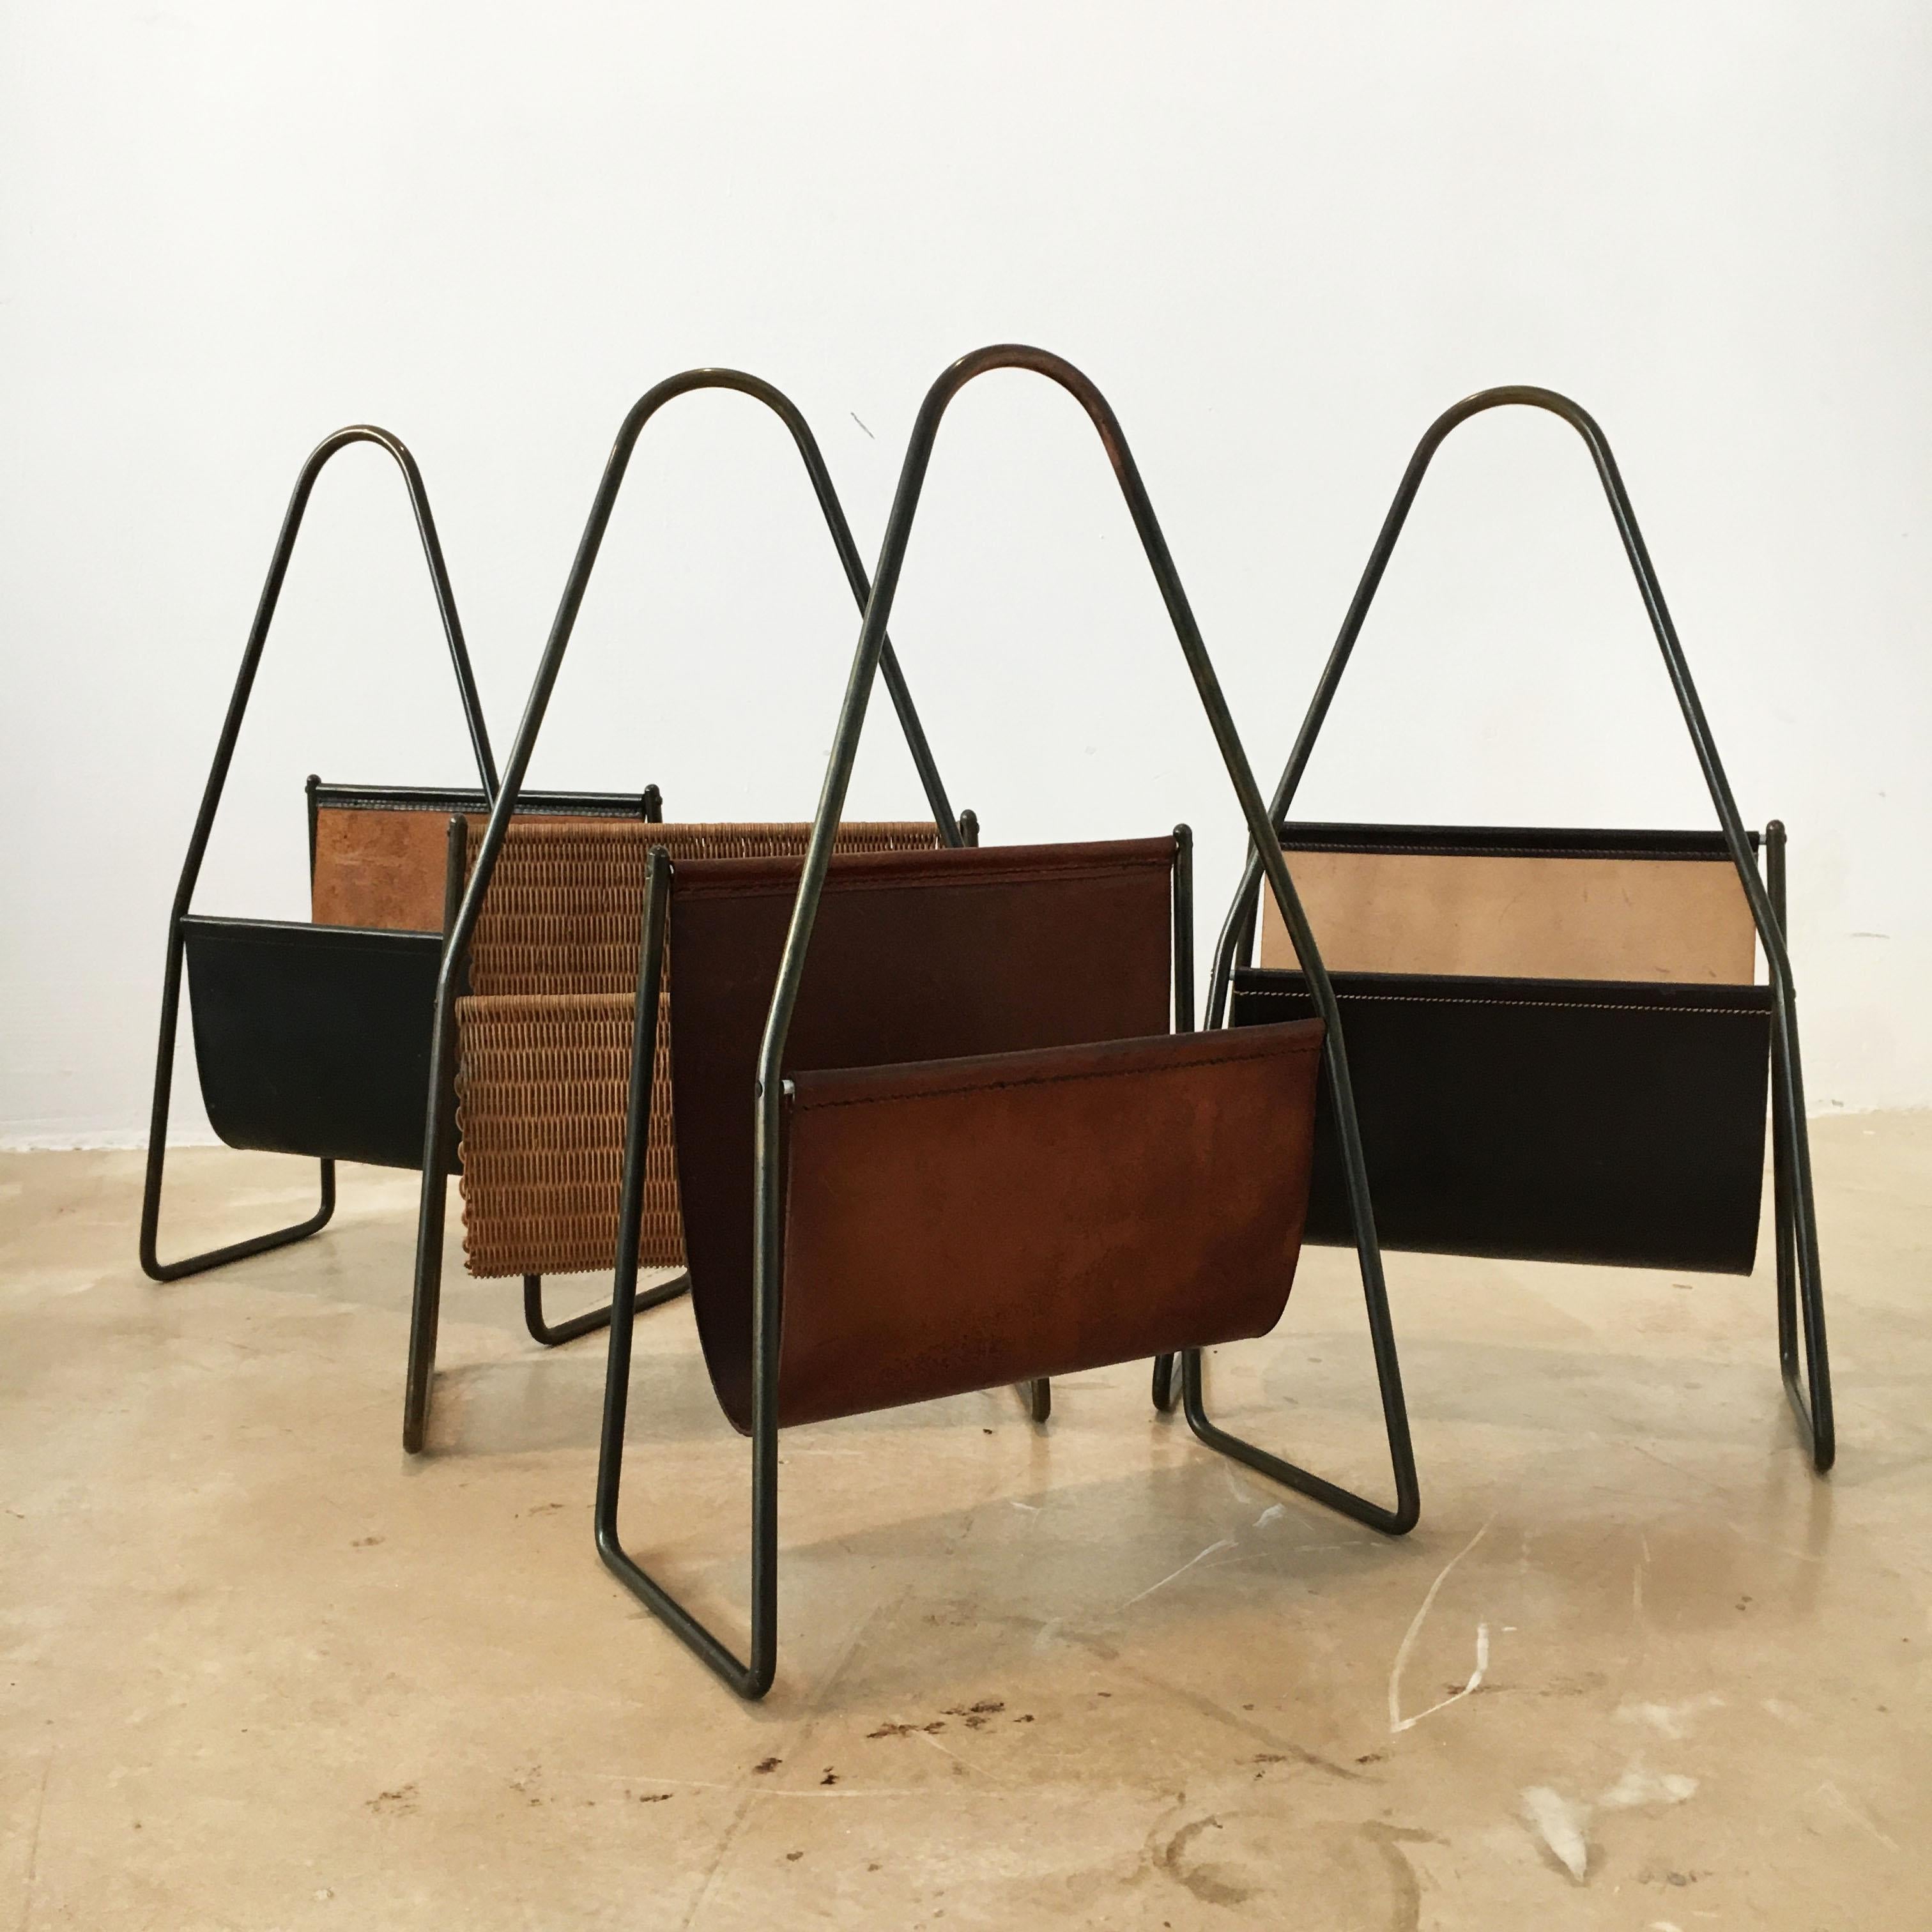 Carl Auböck magazine stand collection, group of four, Austria, 1950s.